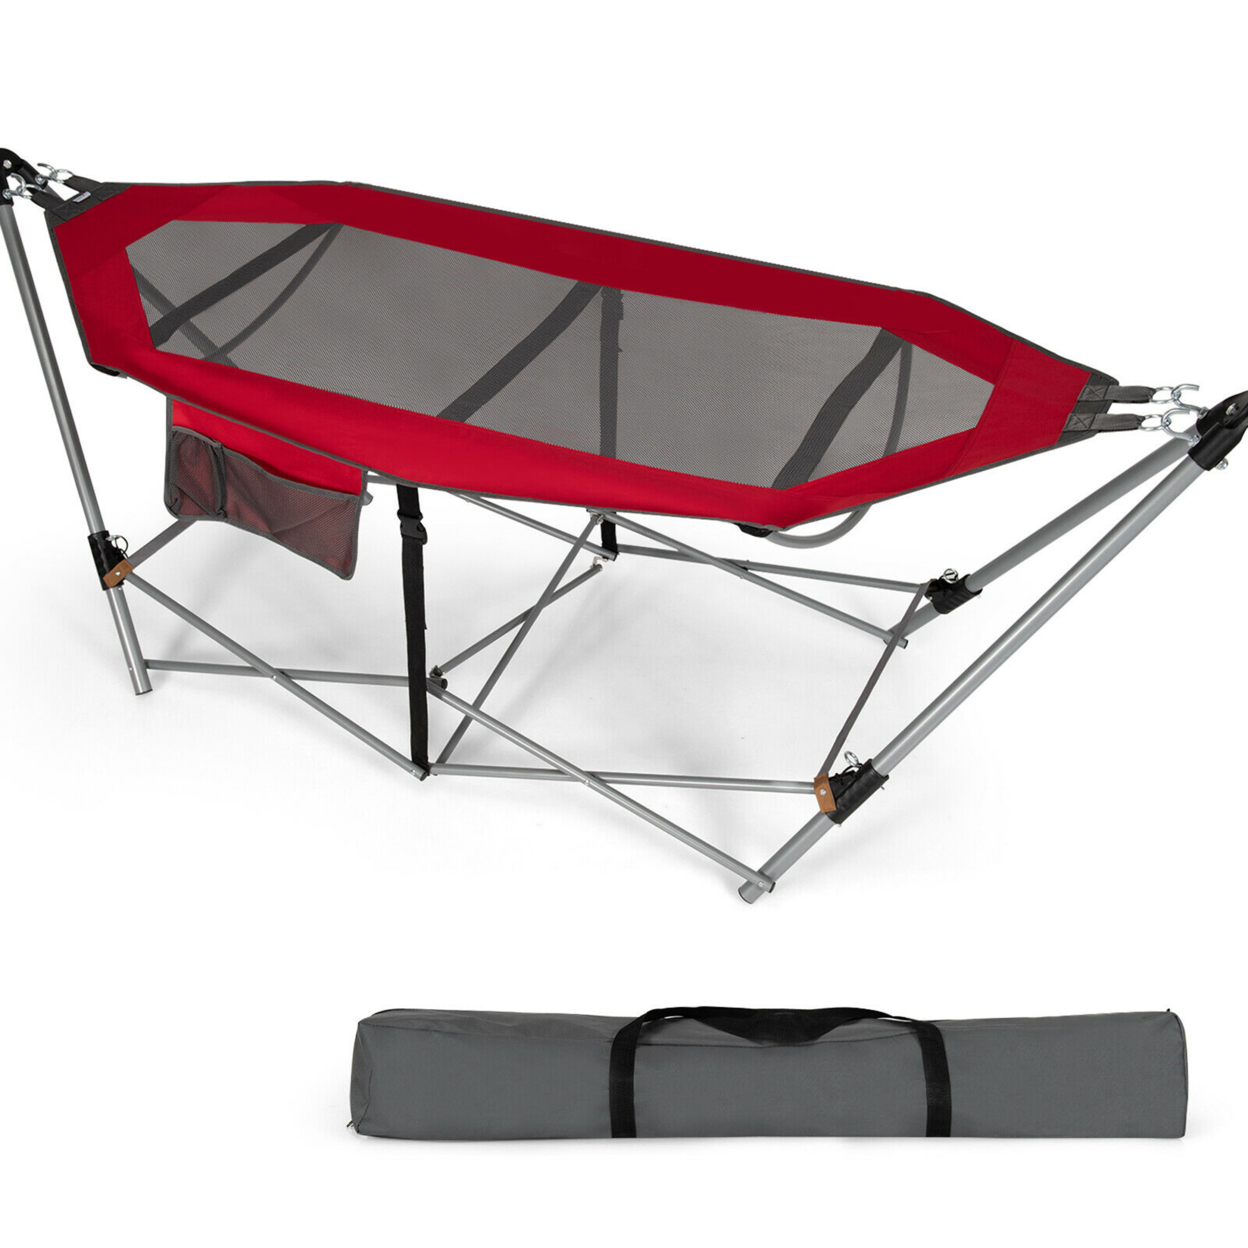 Folding Hammock Indoor & Outdoor Hammock With Side Pocket & Iron Stand - Red